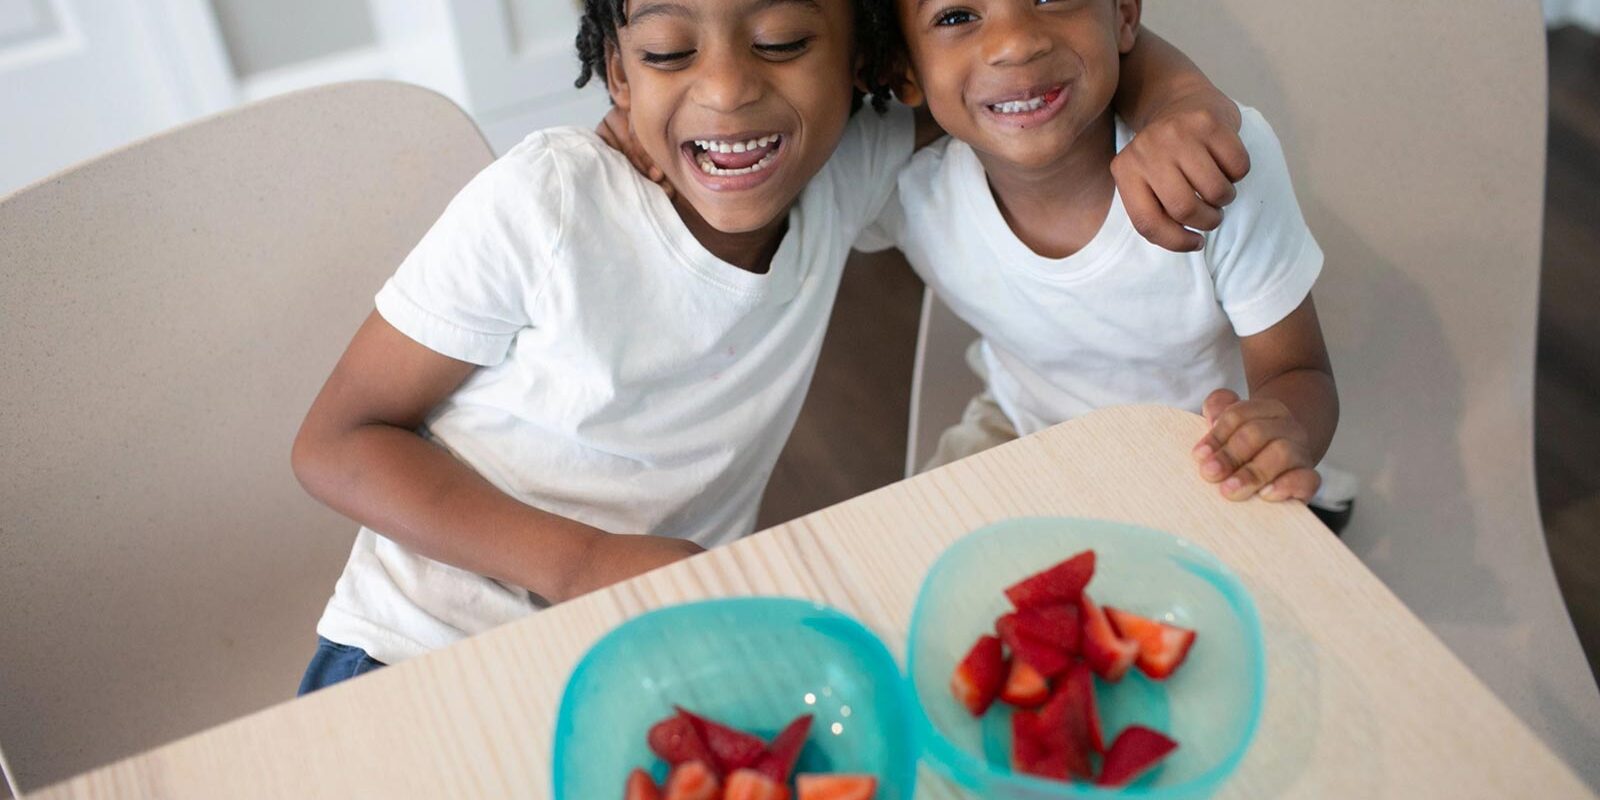 Two toddlers in front of bowls of strawberries